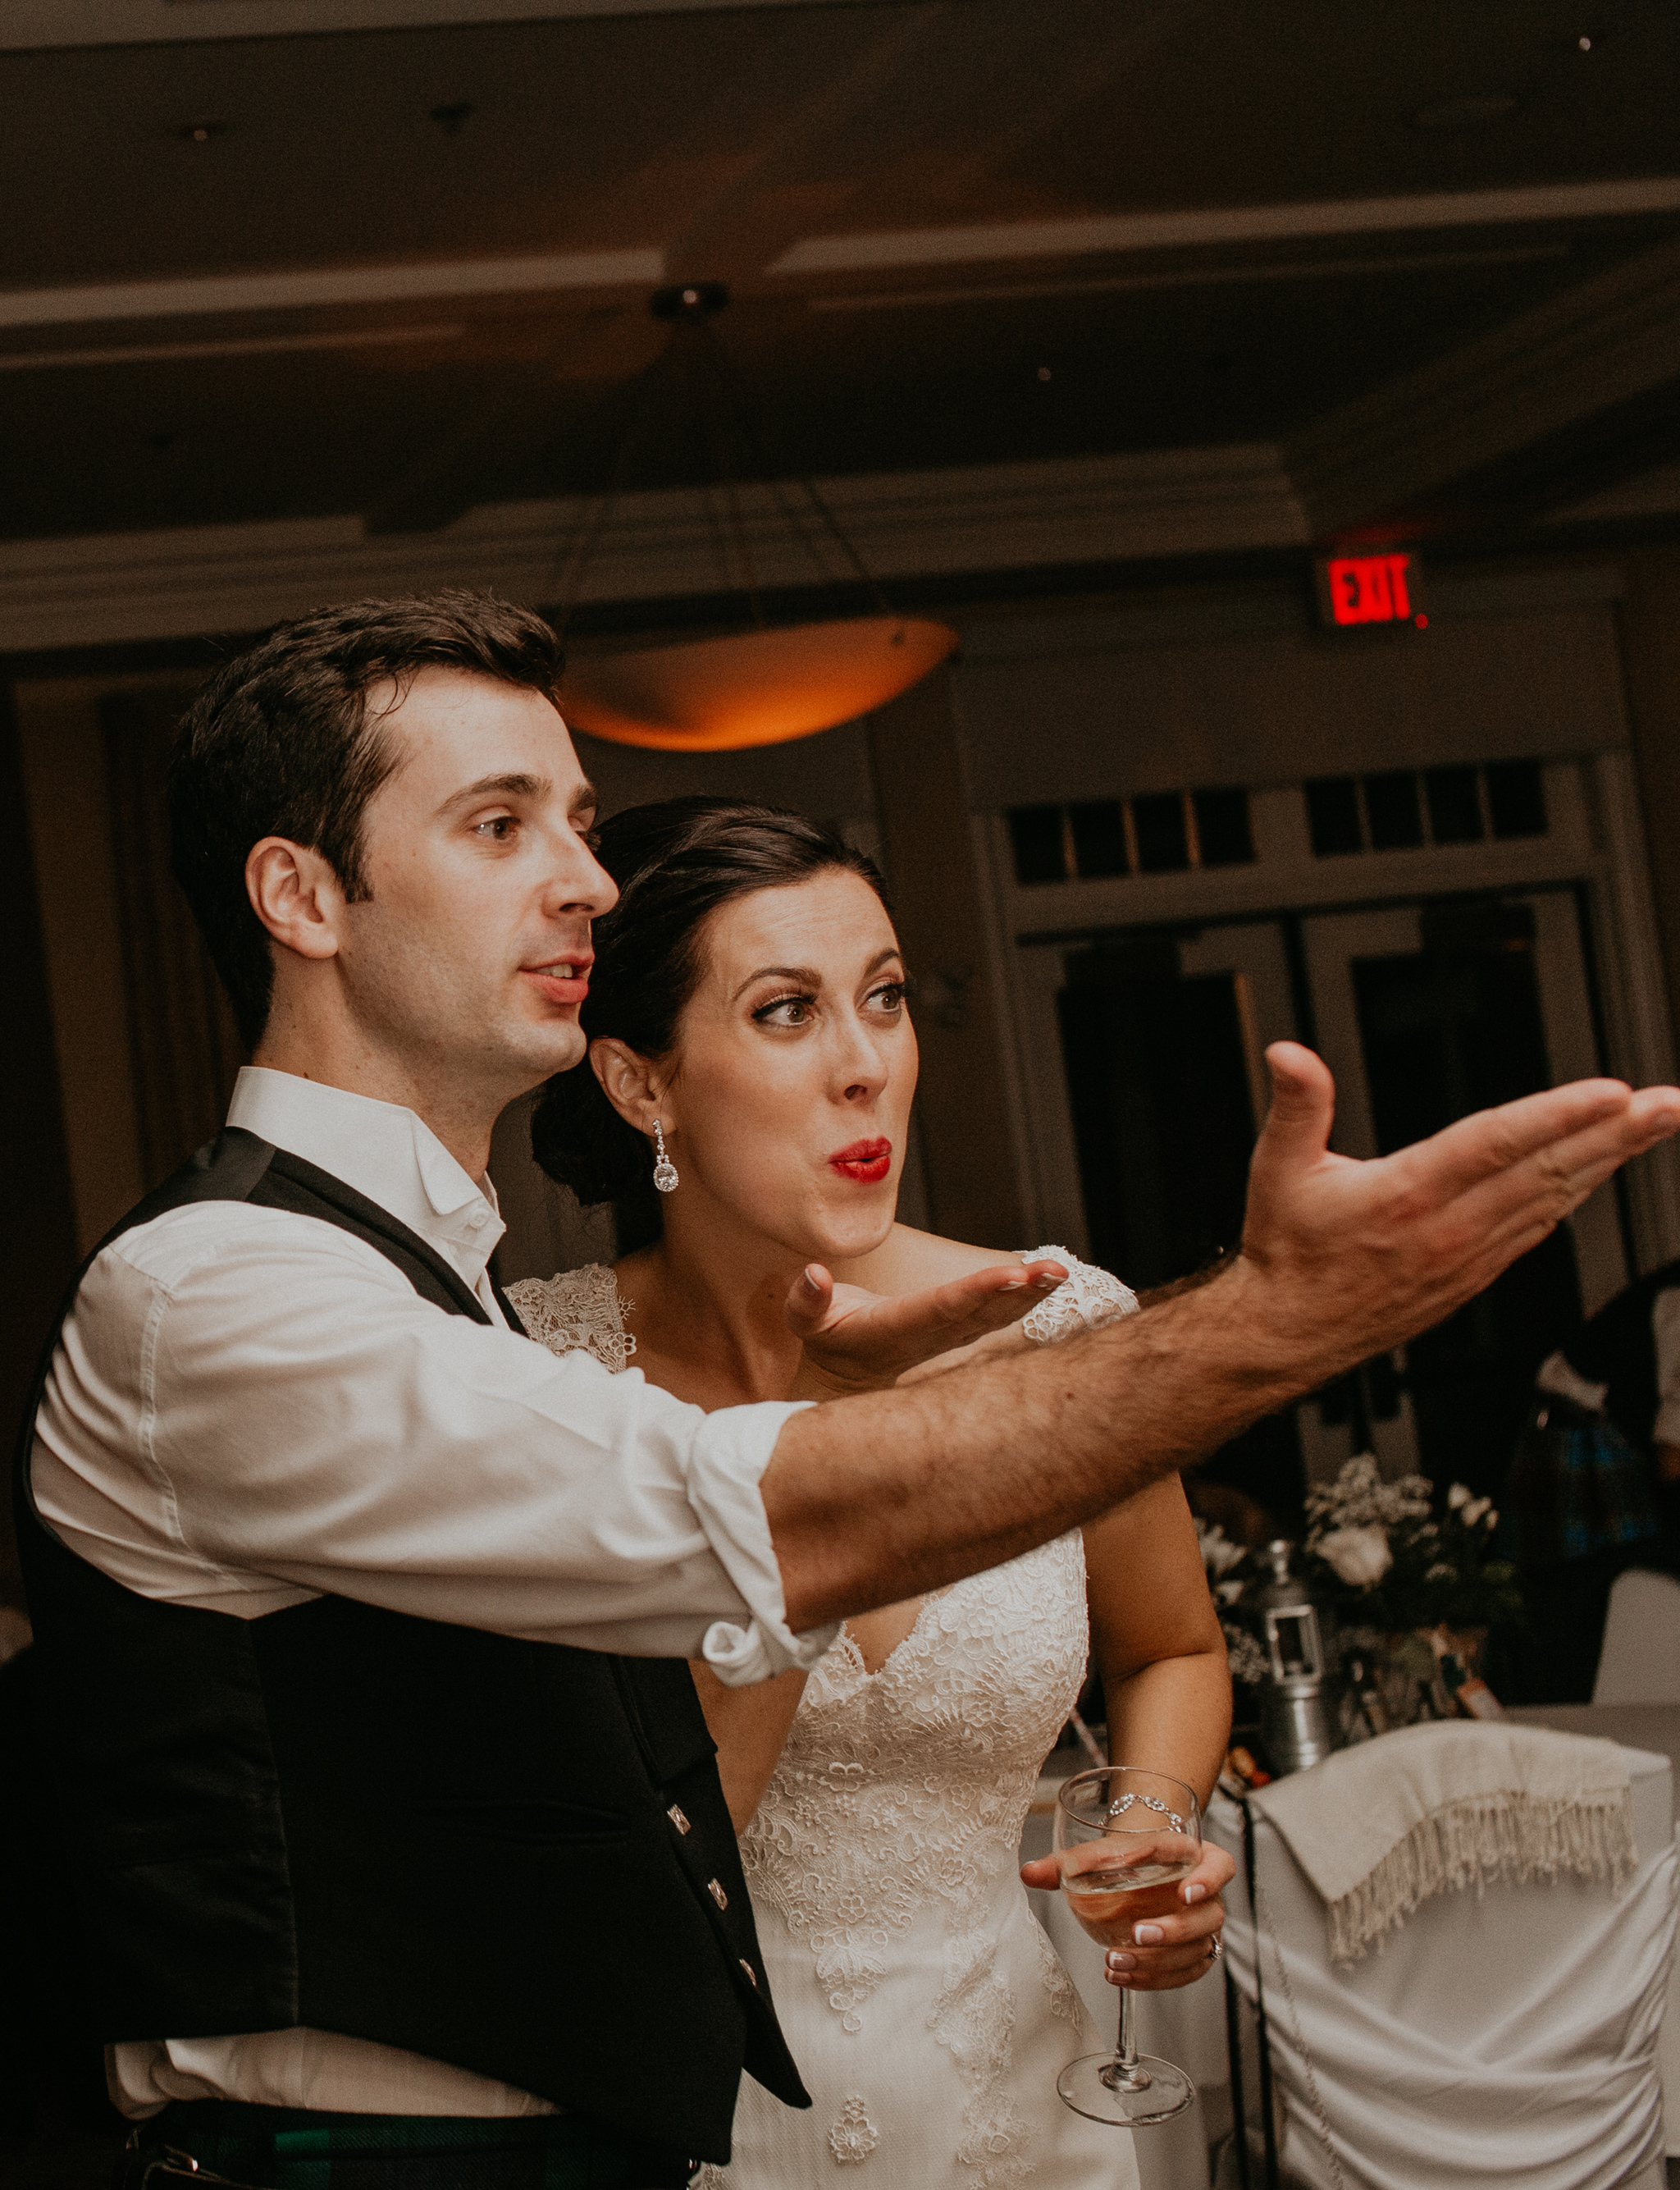 Candid moment of bride and groom blowing kiss at wedding reception